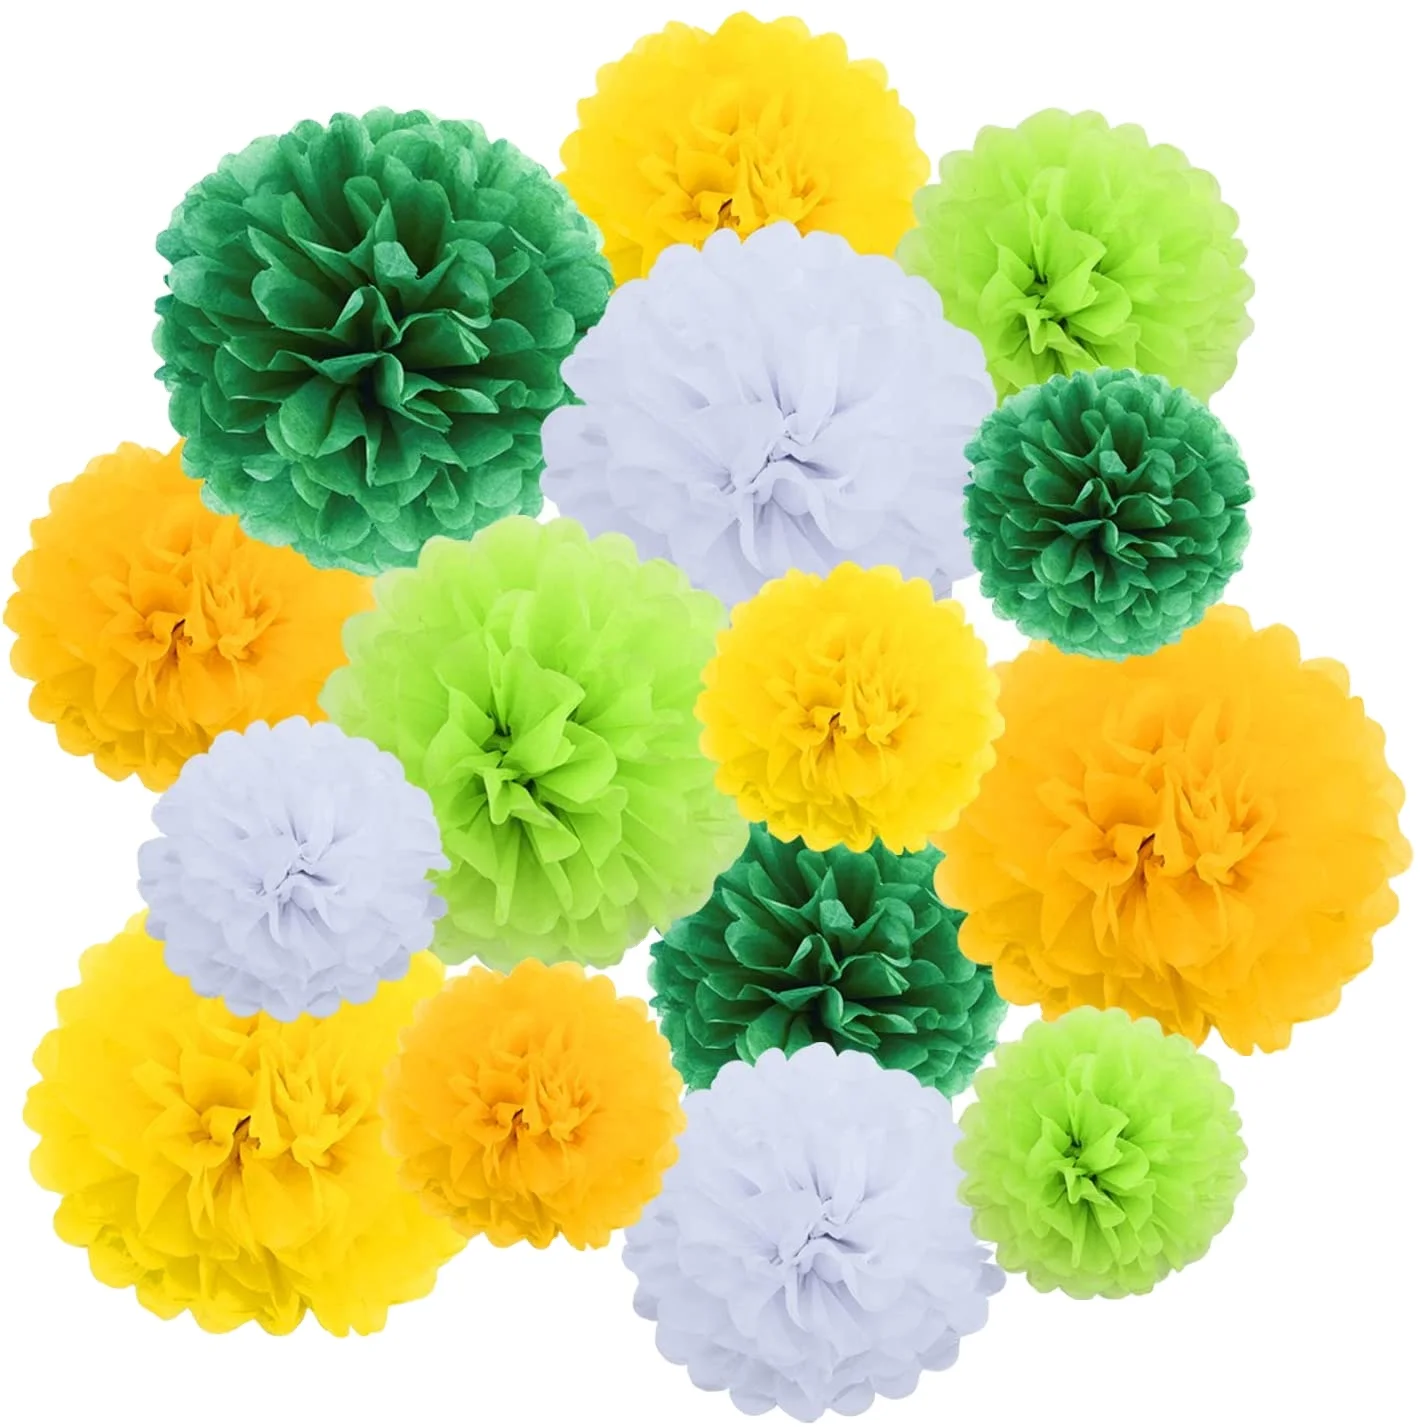 Paper Pom Poms Bright Colorful Tissue Paper Flowers For Party Birthday Wedding Christmas Decorations,15 Each - Buy Paper Decorations Pompom Flowers,Bright Color Paper Decoration Kits,Birthday Wedding Christmas Festive Decorations